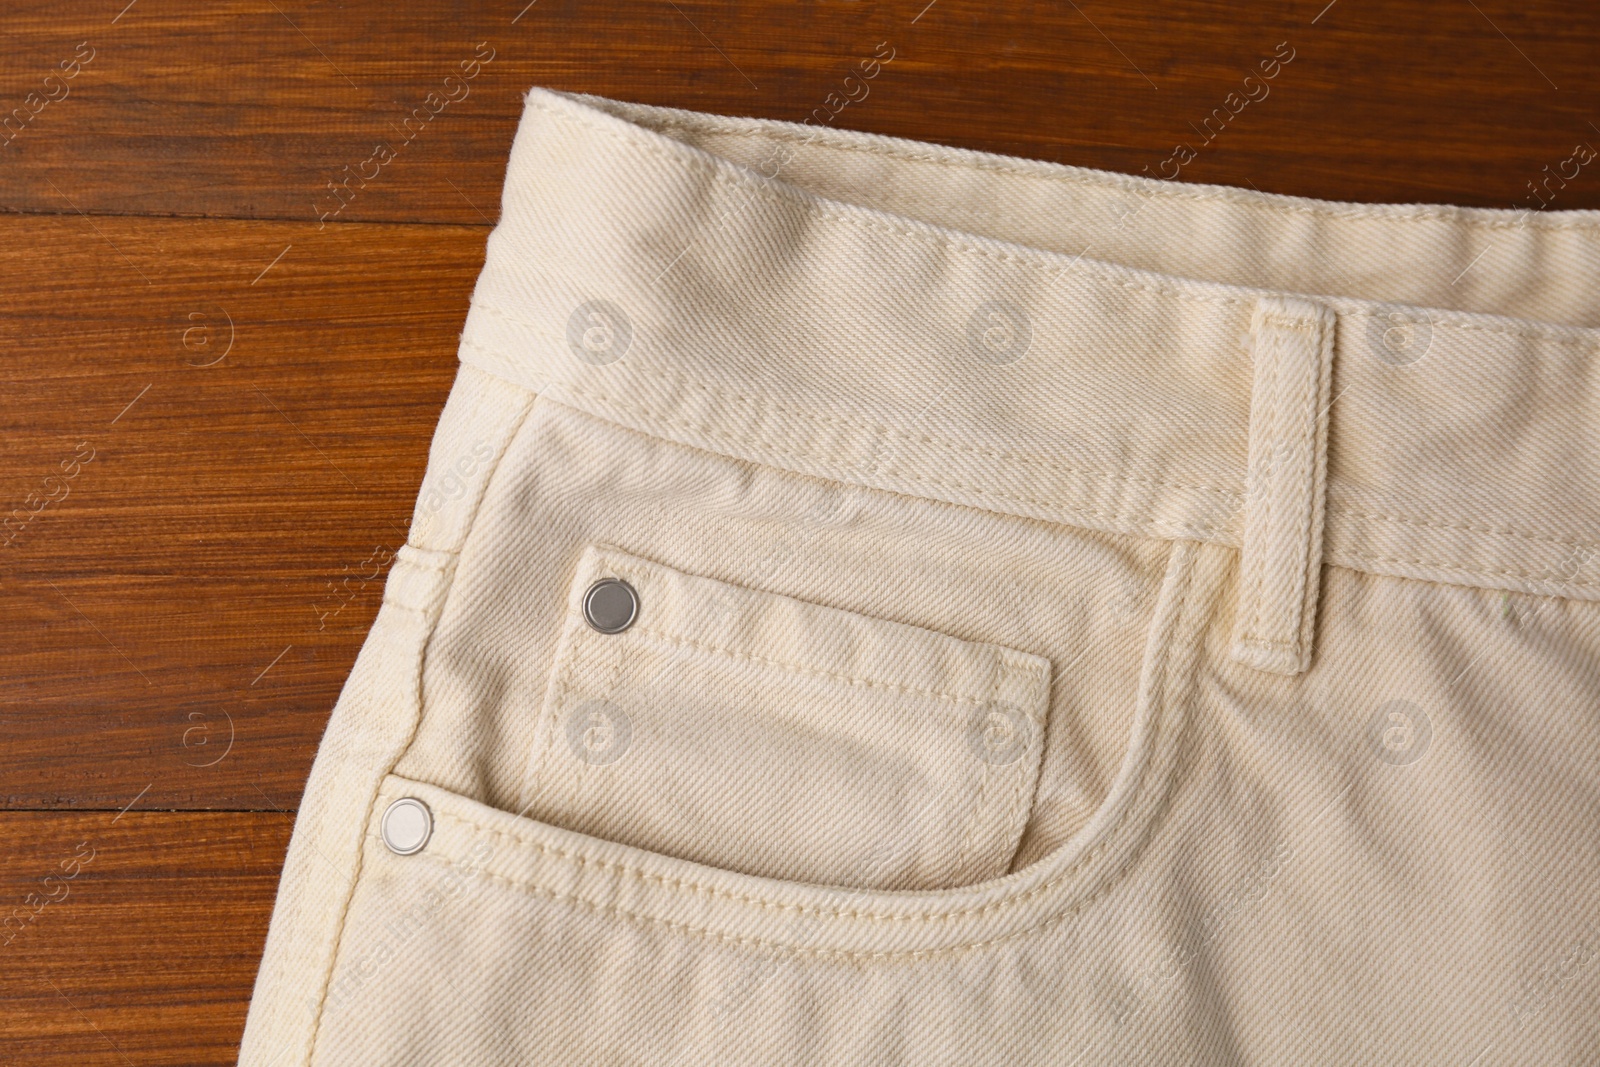 Photo of Stylish beige jeans on wooden background, closeup of inset pocket